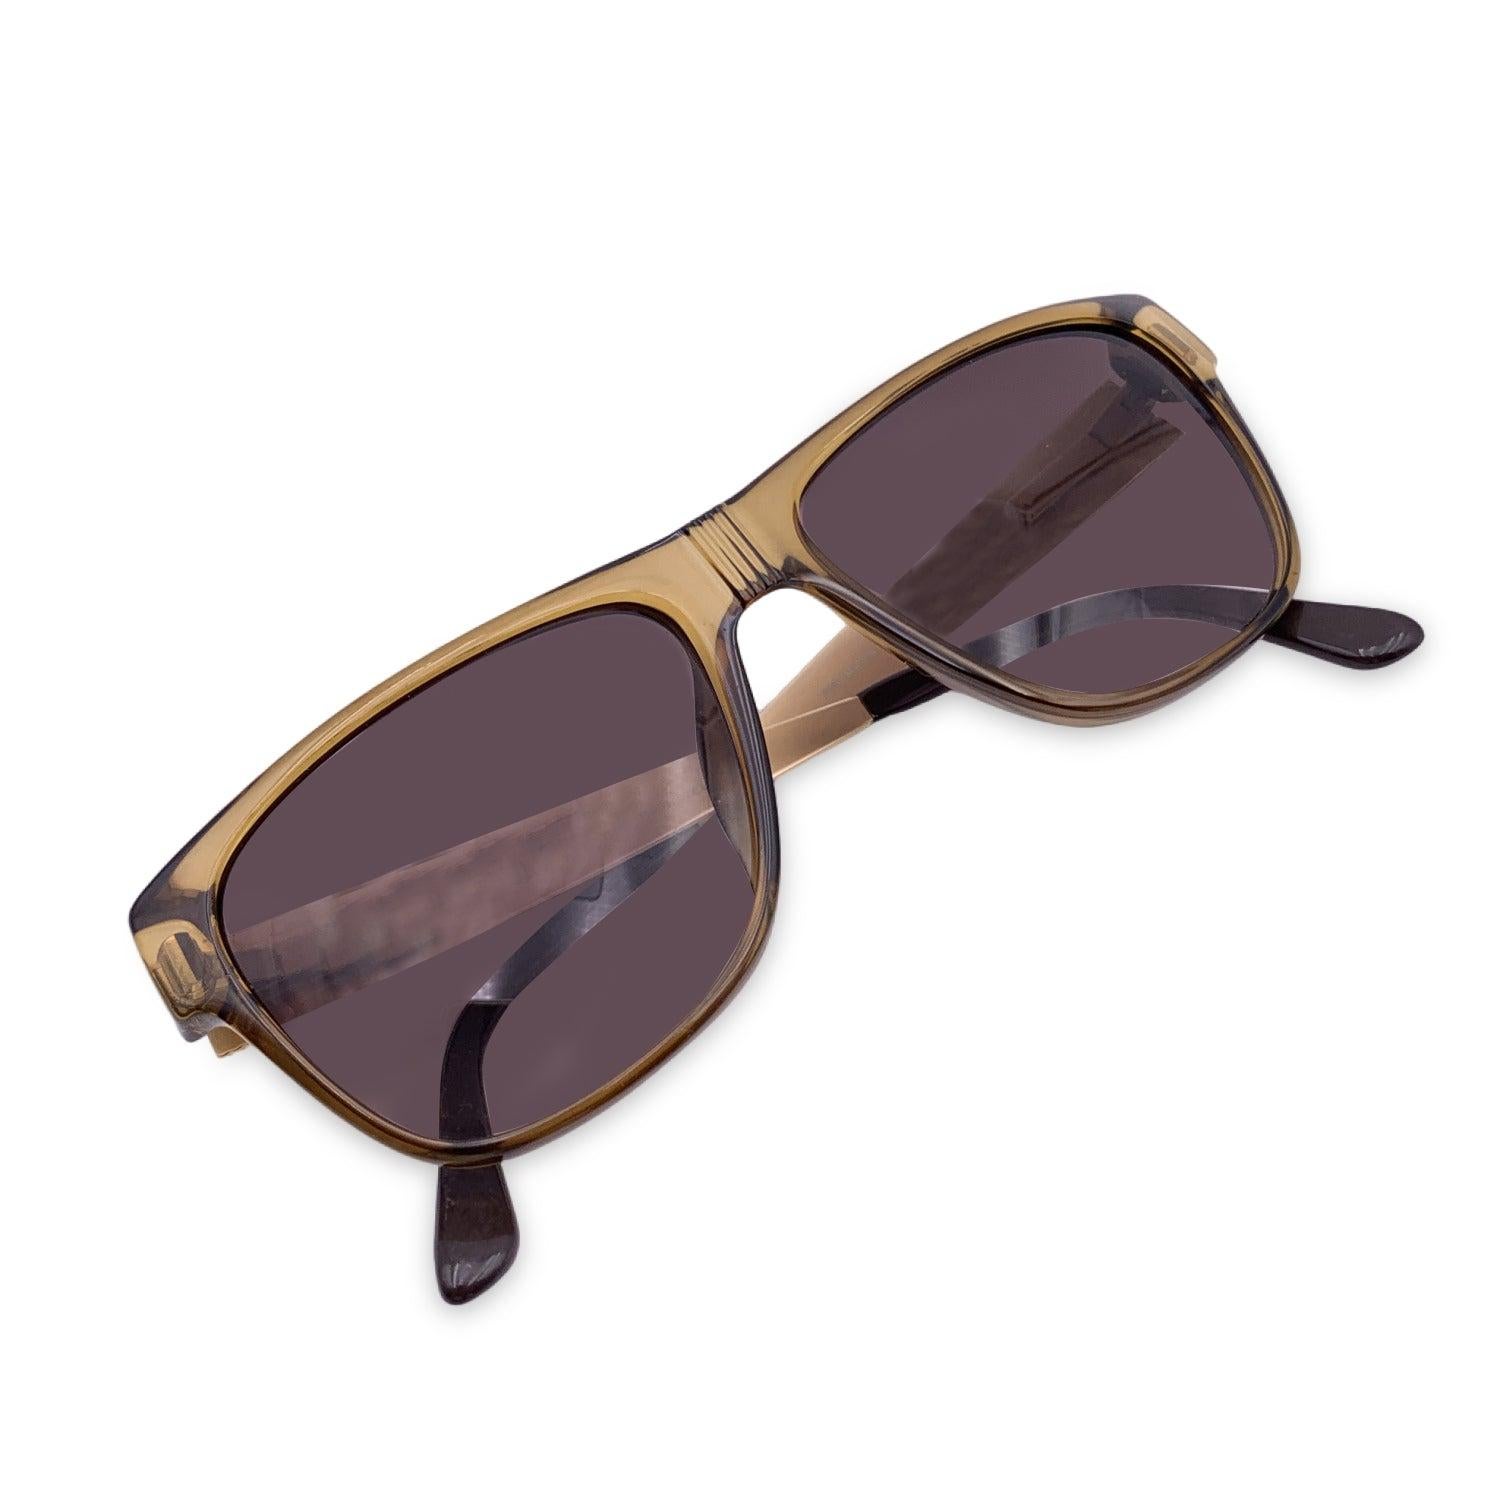 Vintage Christian Dior Monsieur Unisex Sunglasses, Mod. 2406 12 Optyl. Size: 55/15 140mm. Light Brown acetate frame, with gold metal finish on the sides. . 100% Total UVA/UVB protection brown gradient lenses. CD logos on temples. Details MATERIAL: